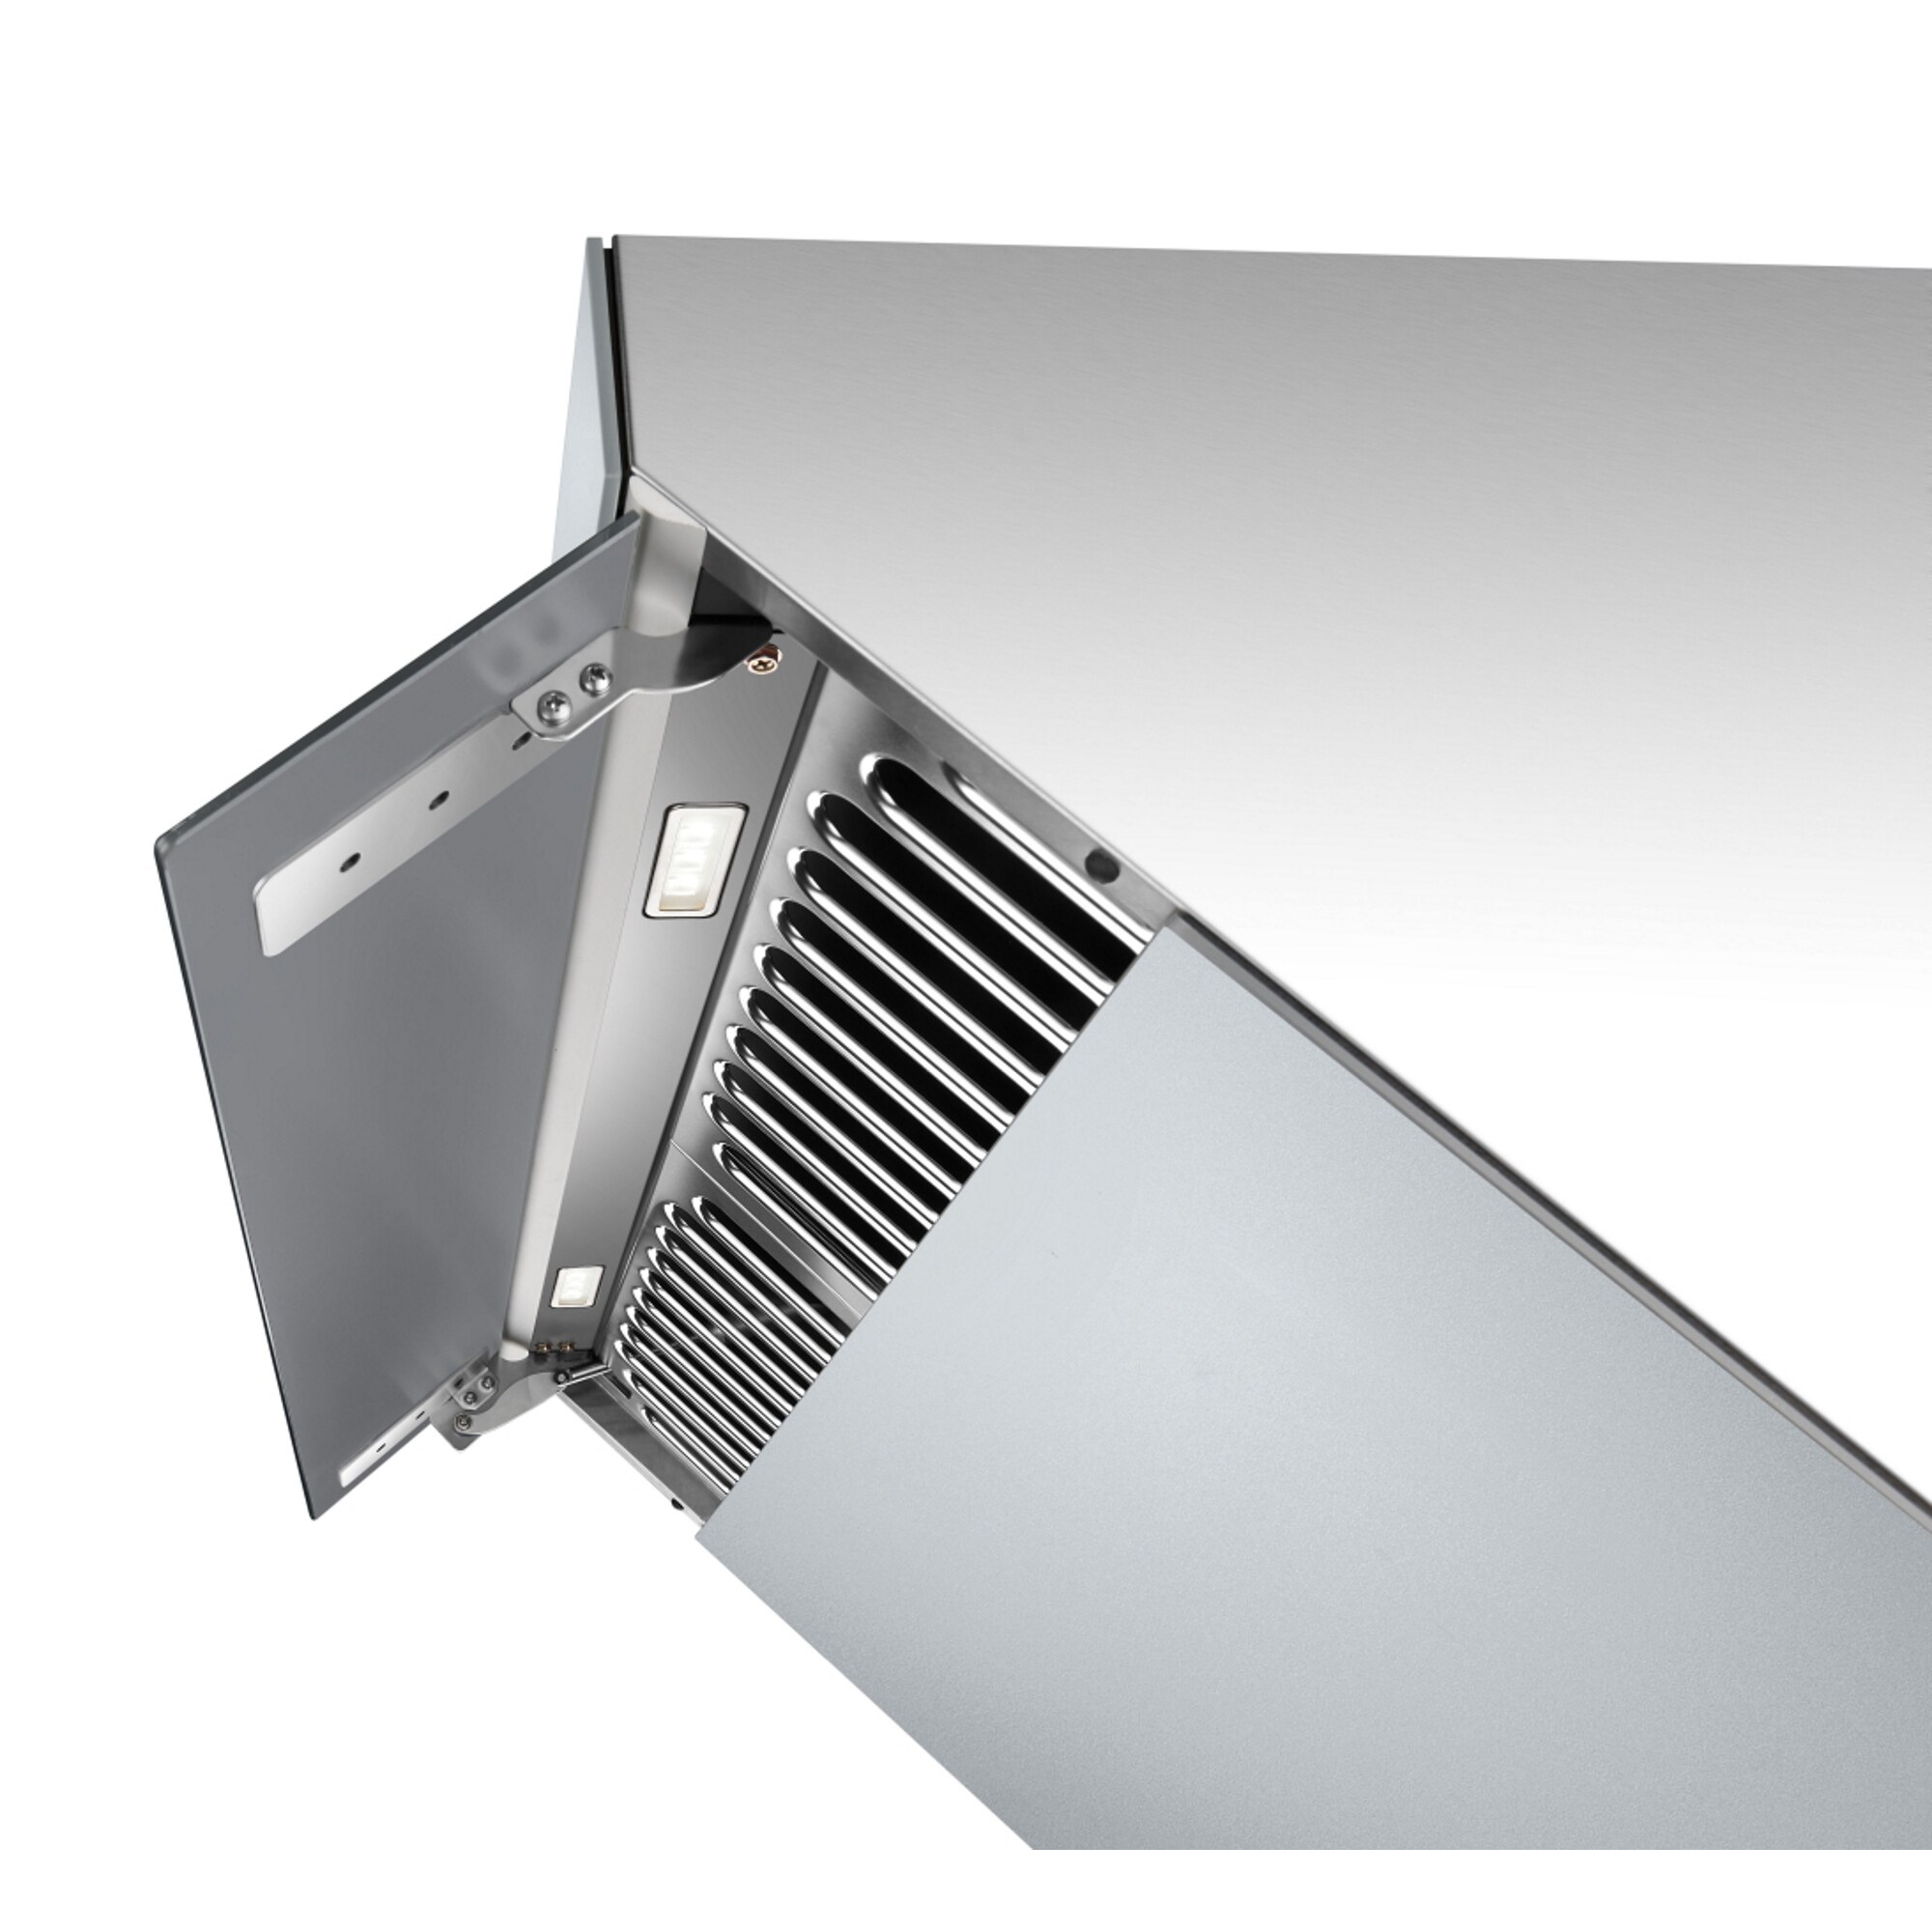 FOTILE Wall Mount Range Hood with 2 LED Lights, 850CFM, 3 Speeds,  Touchscreen, Tempered Glass - Bed Bath & Beyond - 31289978